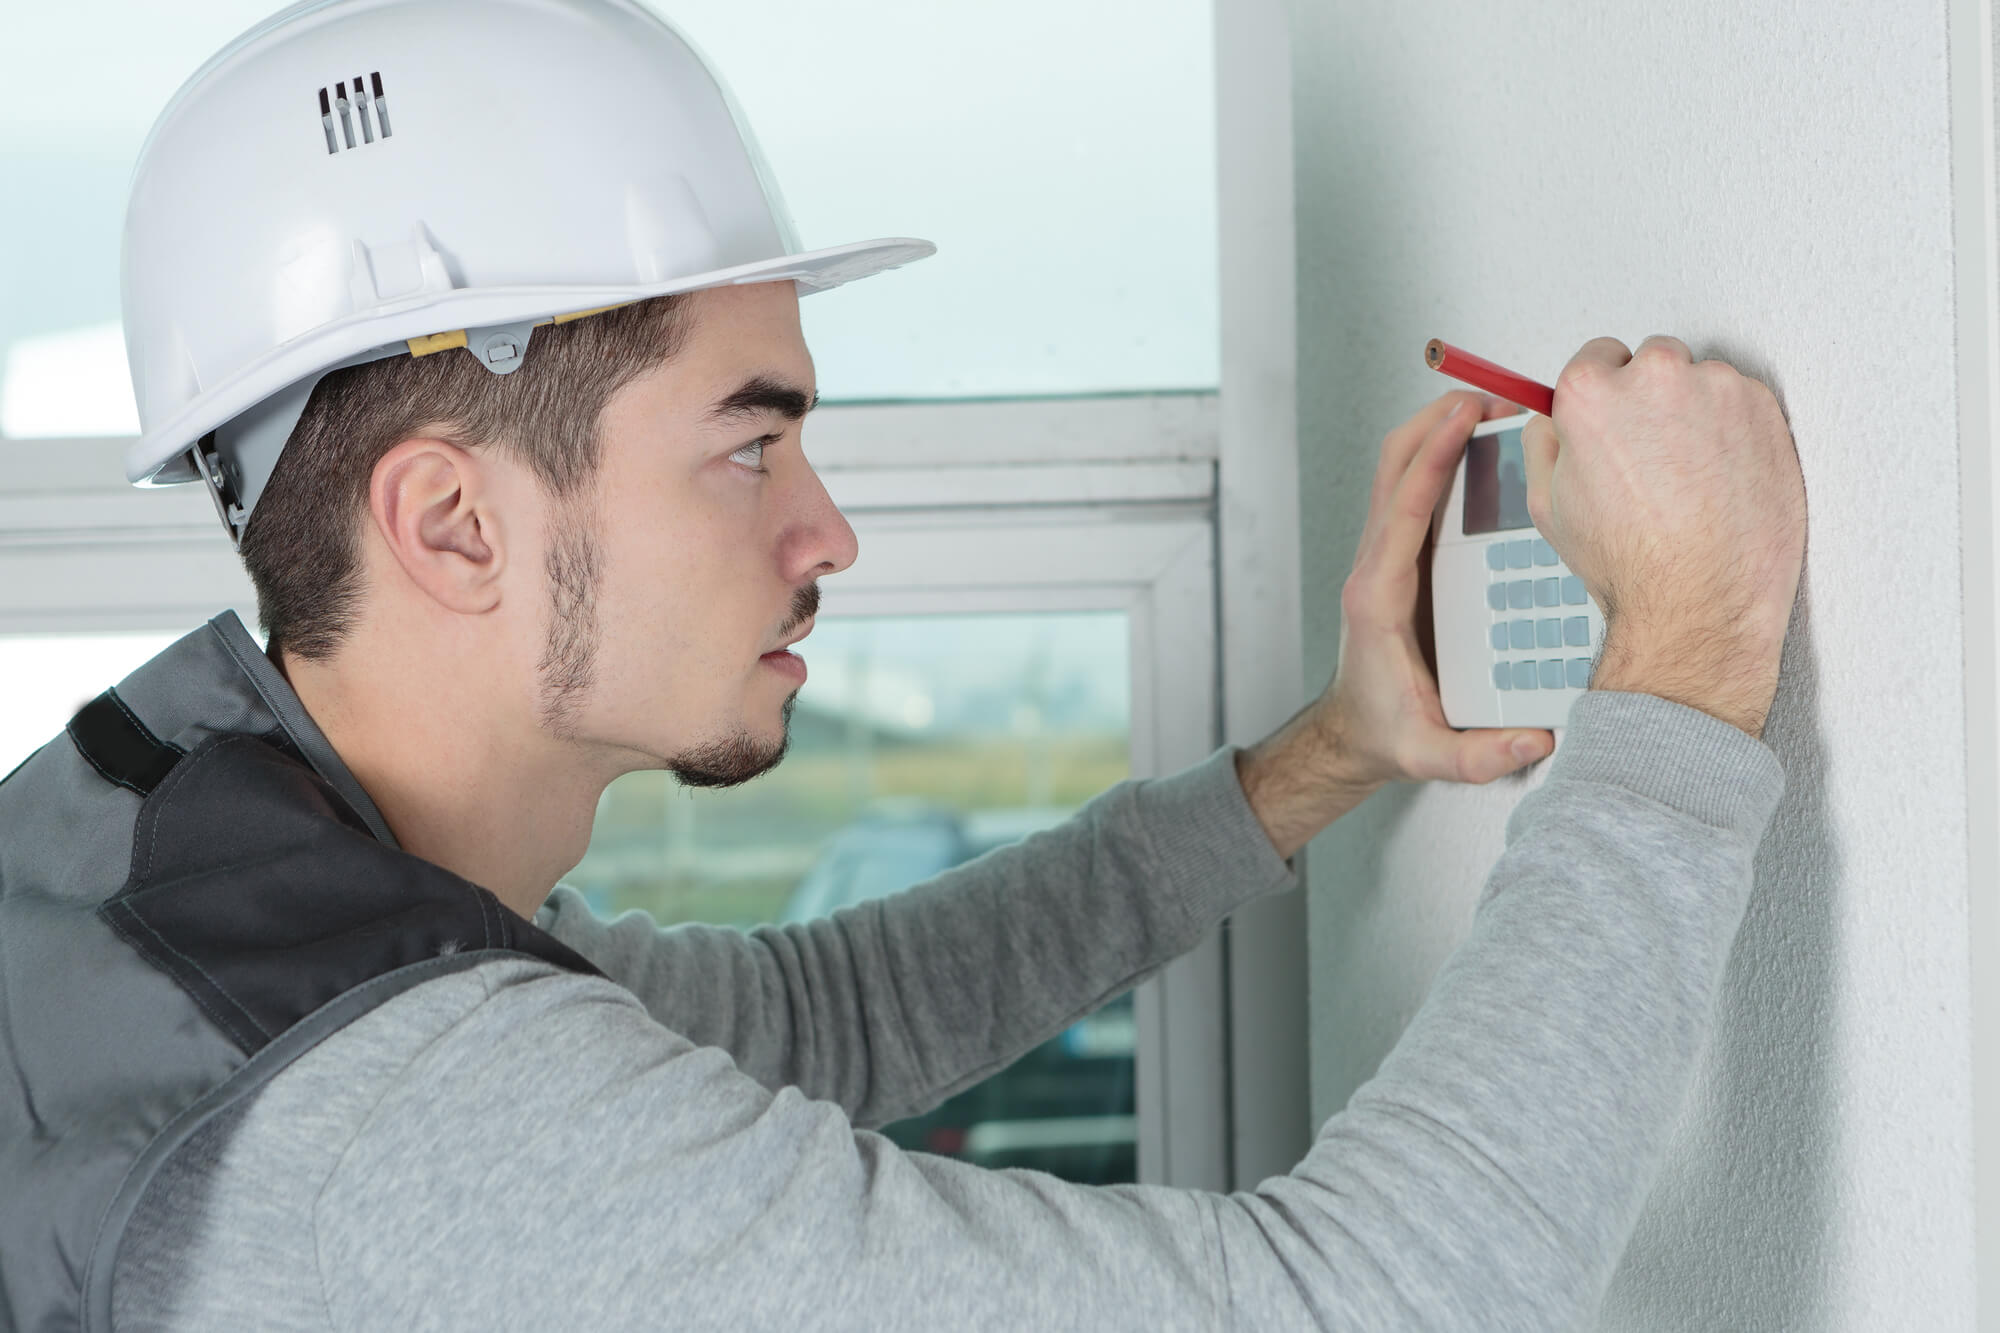 A man installing security systems in a home. 